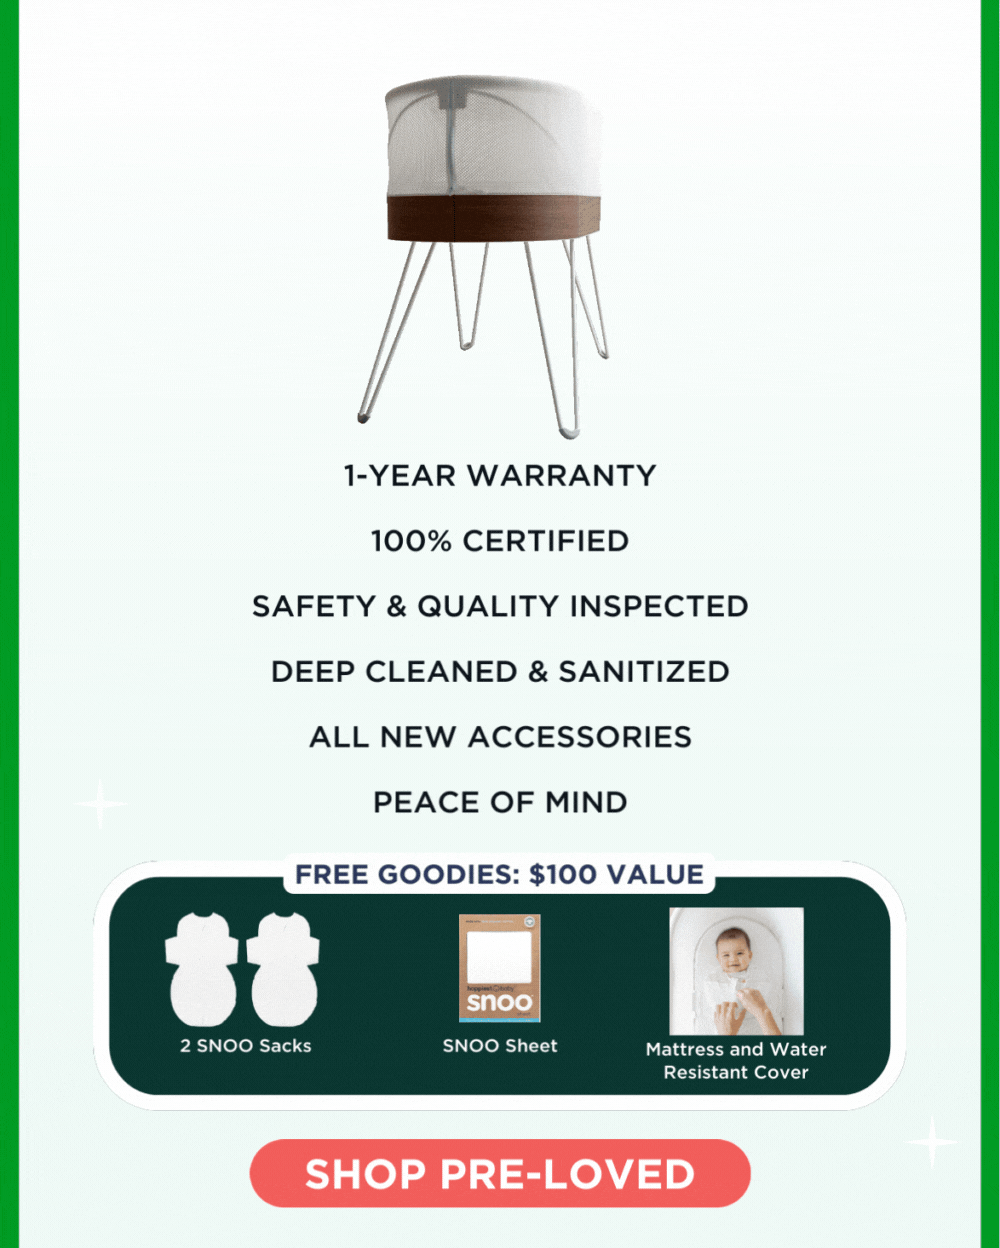 1-year warranty, 100% certified, safety & quality inspected, deep cleaned & sanitized, all new accessories, peace of mind. FREE GOODIES: \\$100 VALUE: 2 SNOO Sacks, SNOO Sheet, Mattress and Water Resistant Cover. SHOP PRE-LOVED